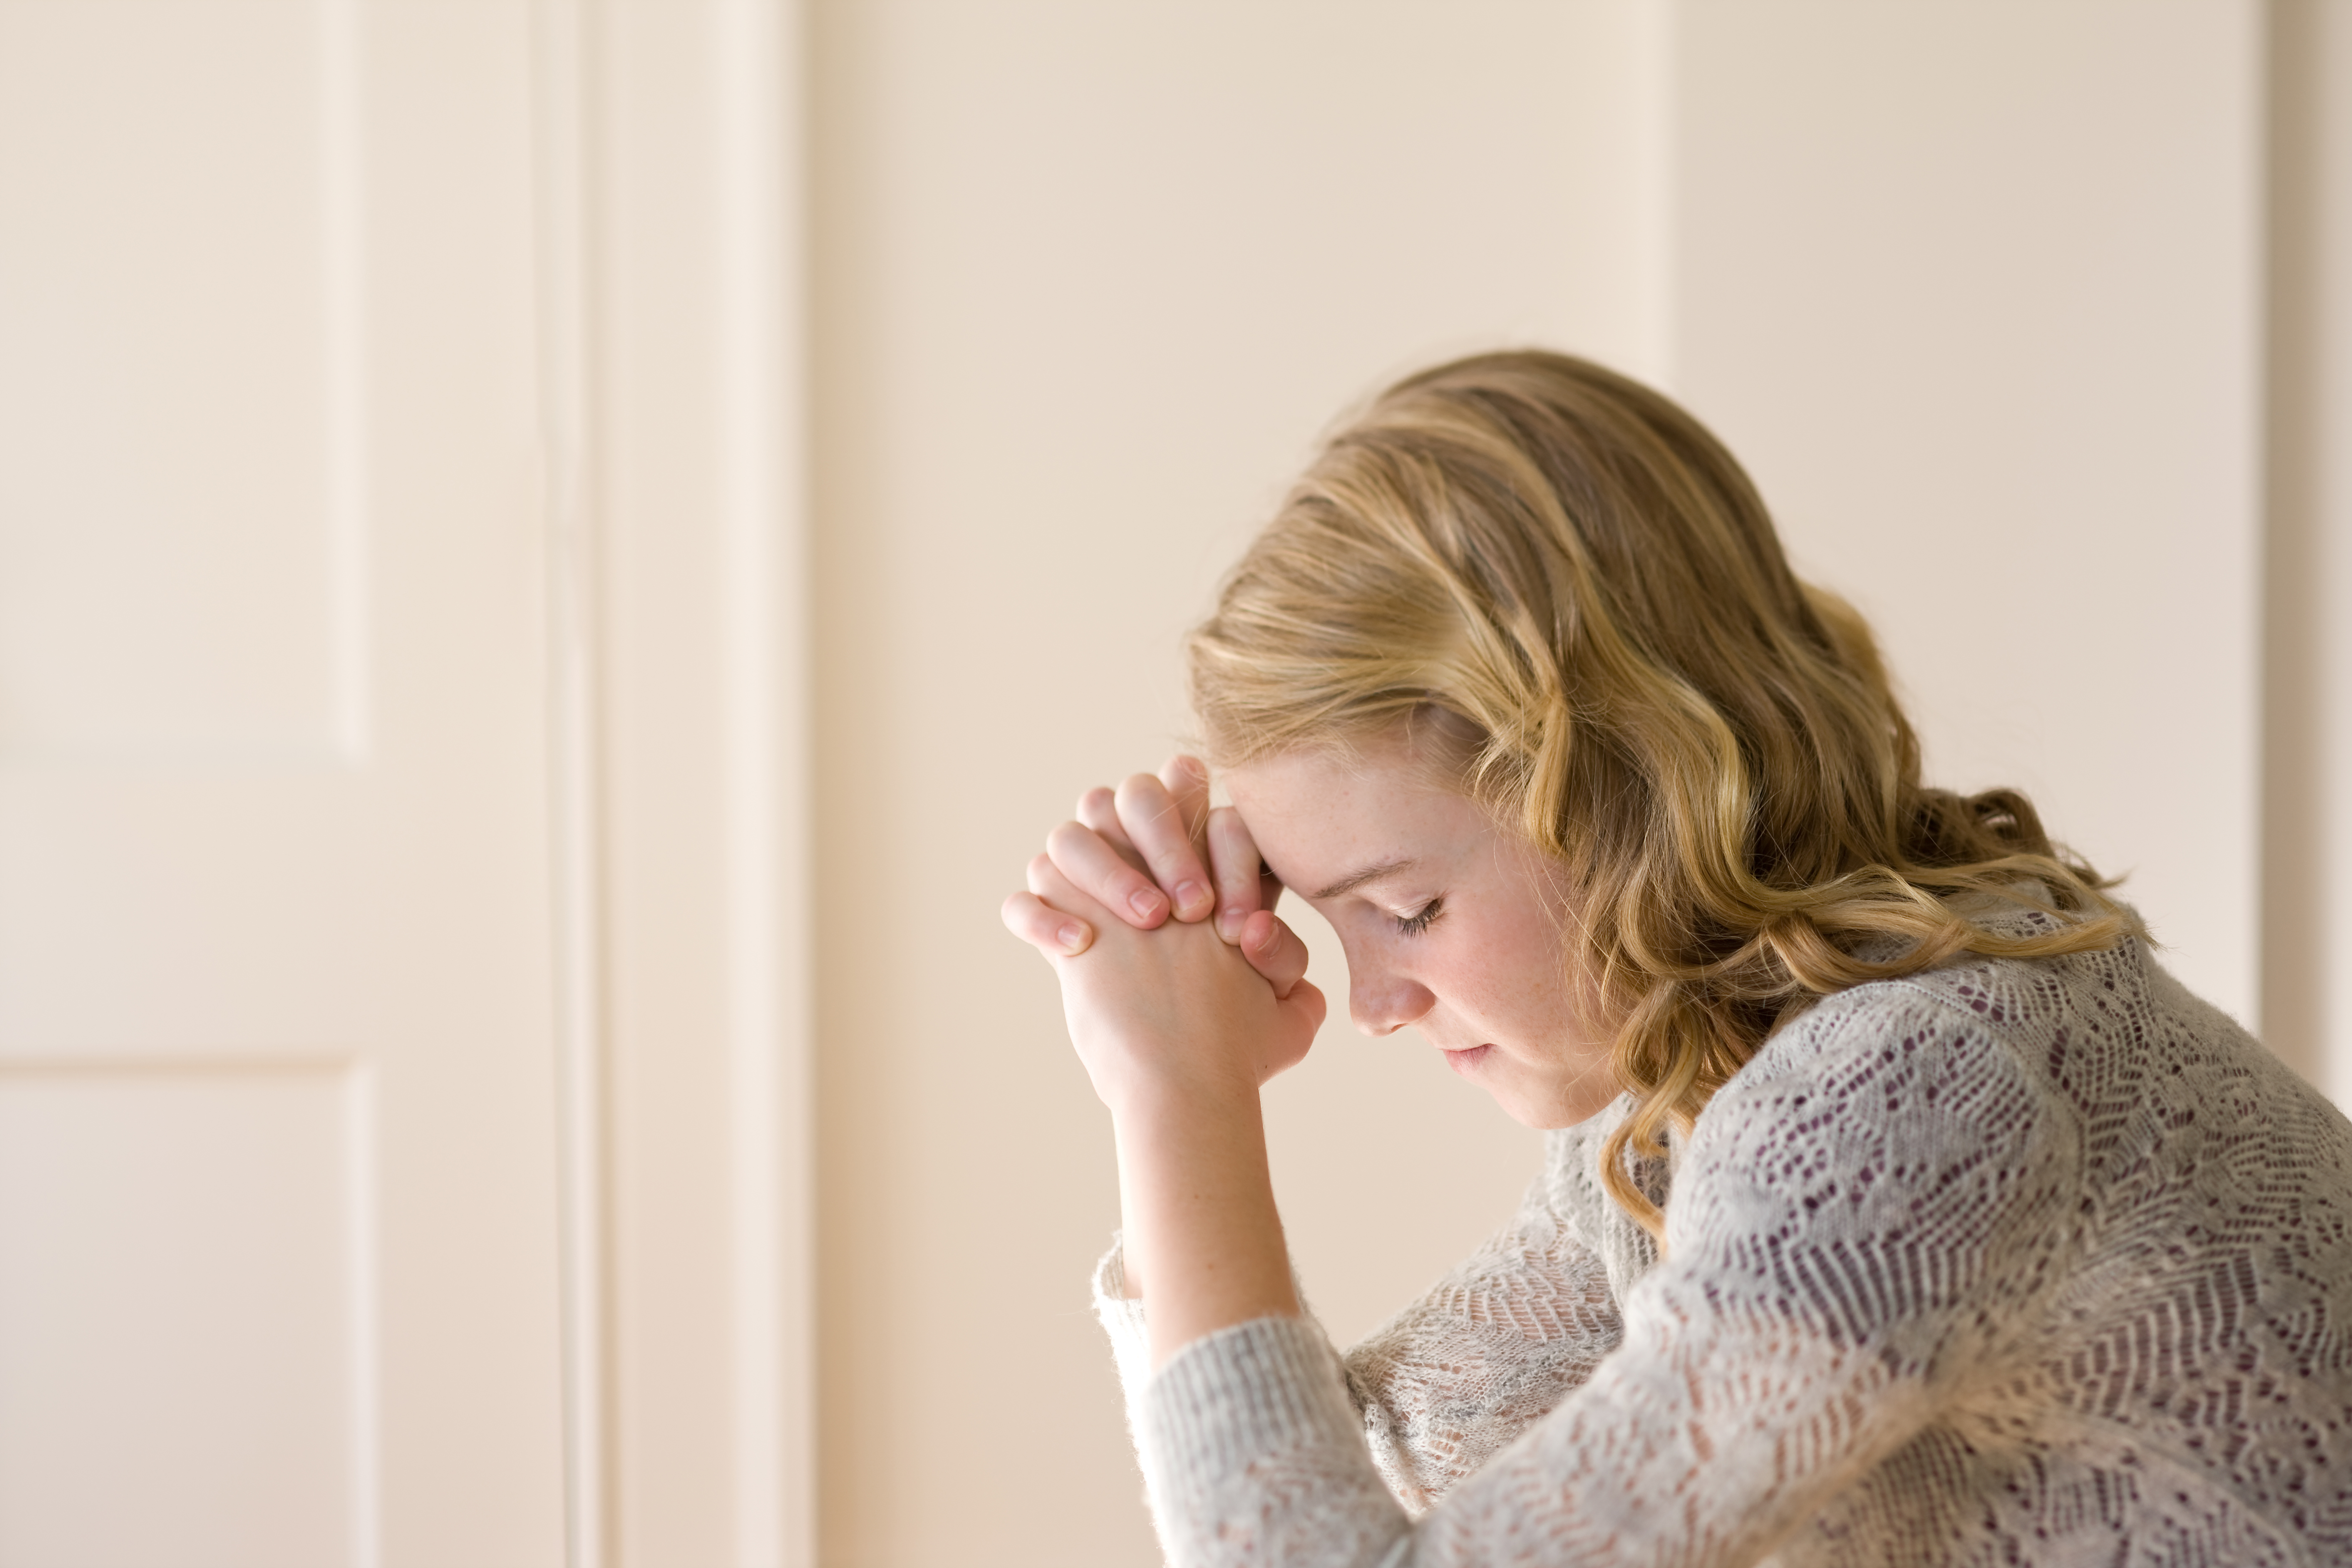 A young woman clasps her hands and rests her forehead on them, closes her eyes, and prays.